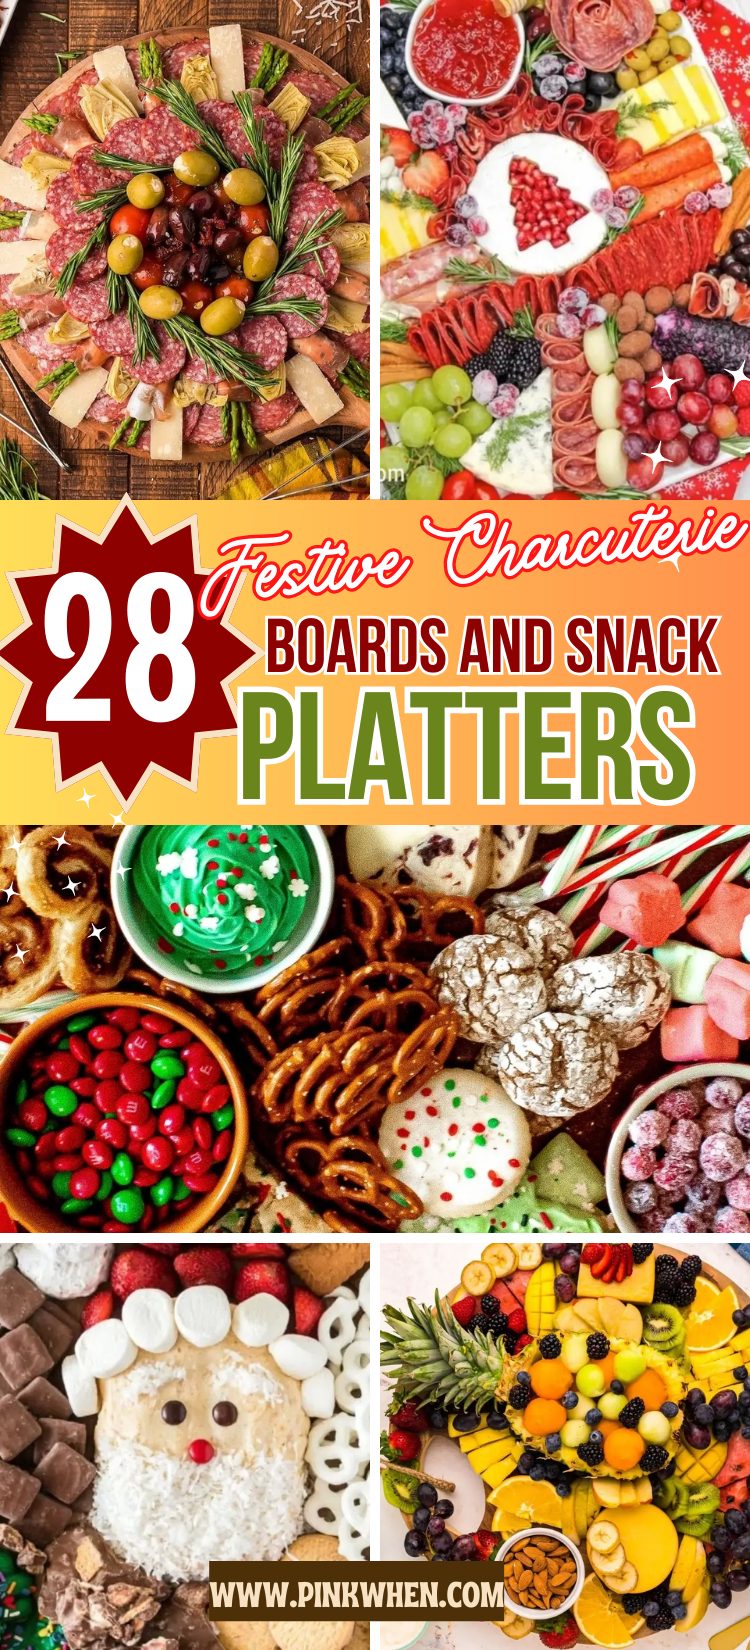 28 Festive Charcuterie Boards and Snack Platters